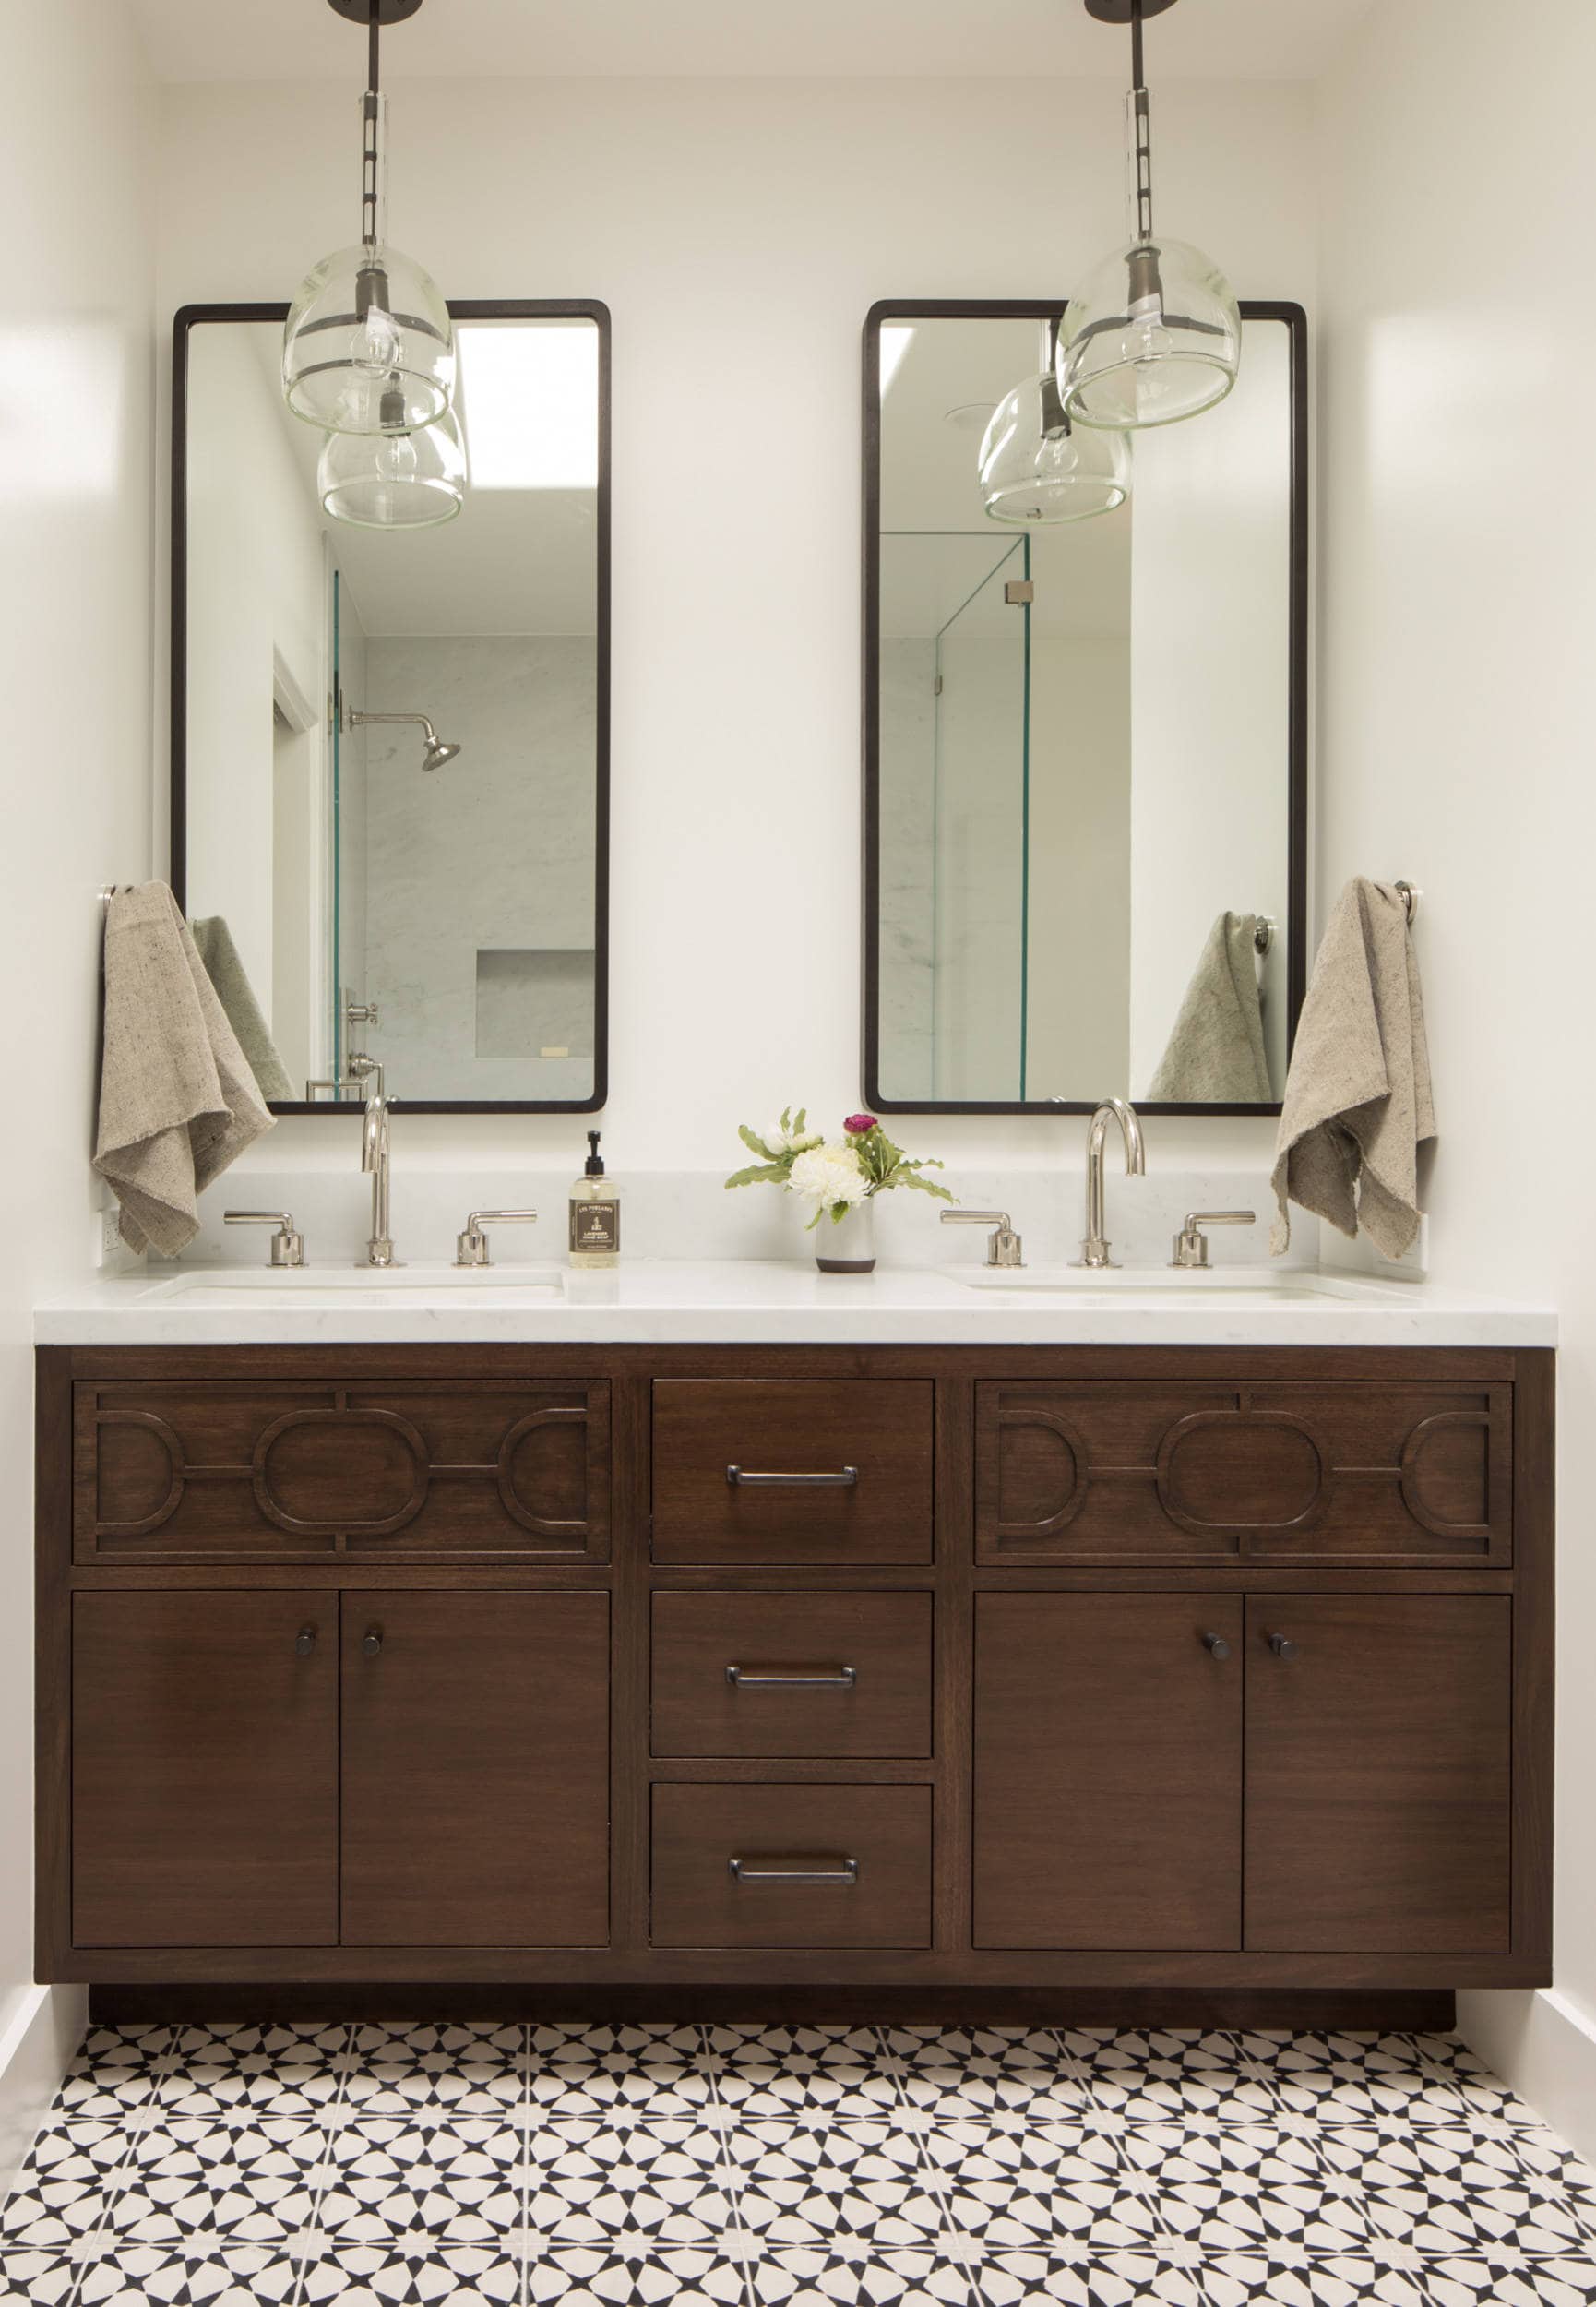 California Casual Design home tour in Hillsborough featuring modern bathroom with double wood vanity